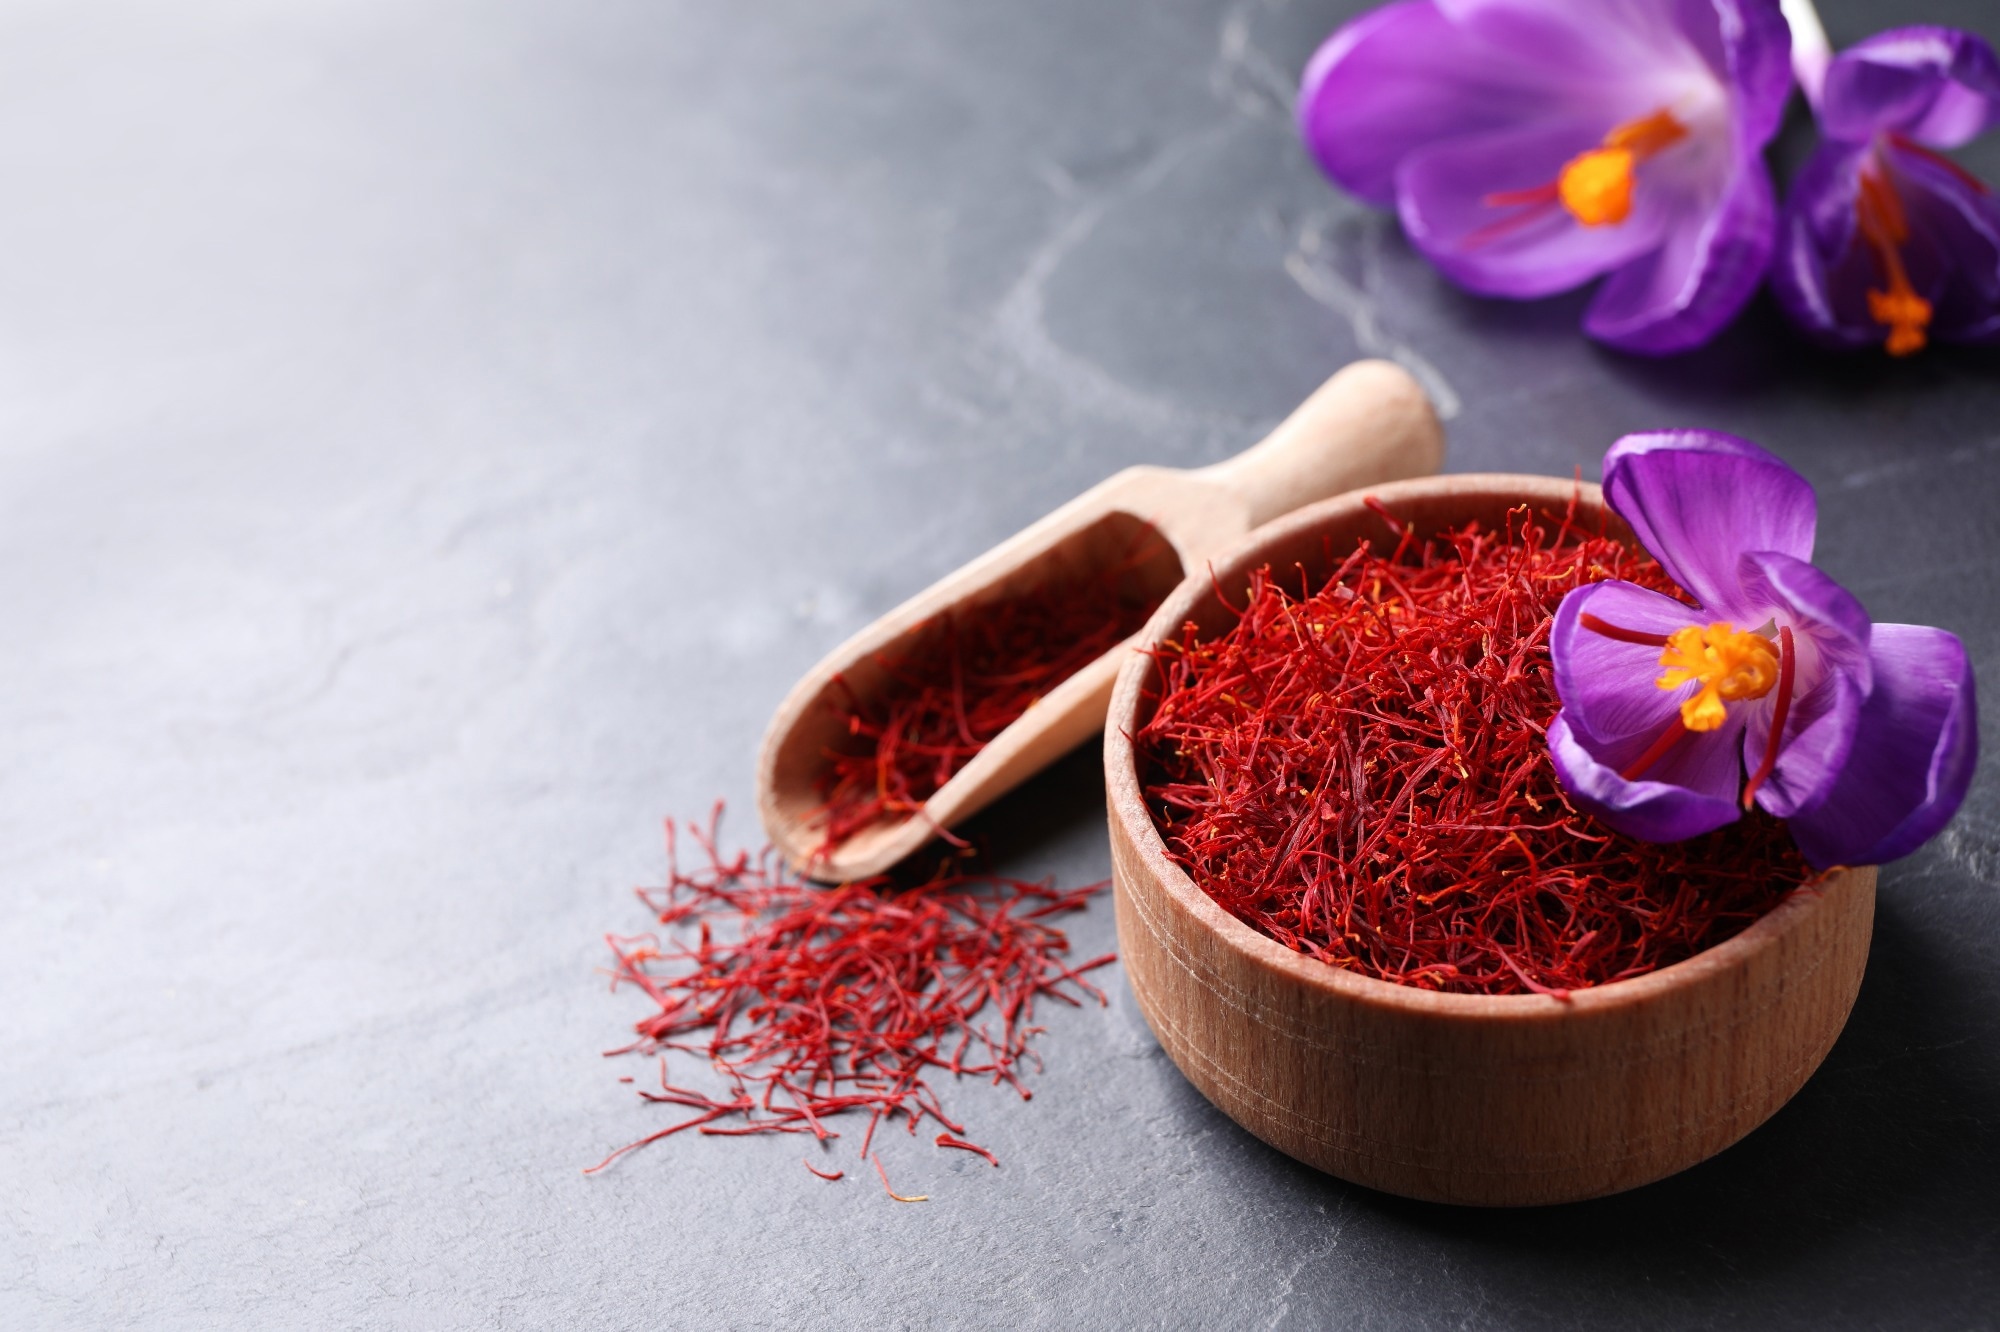 Study: Mechanism of Antitumor Effects of Saffron in Human Prostate Cancer Cells. Image Credit: New Africa/Shutterstock.com